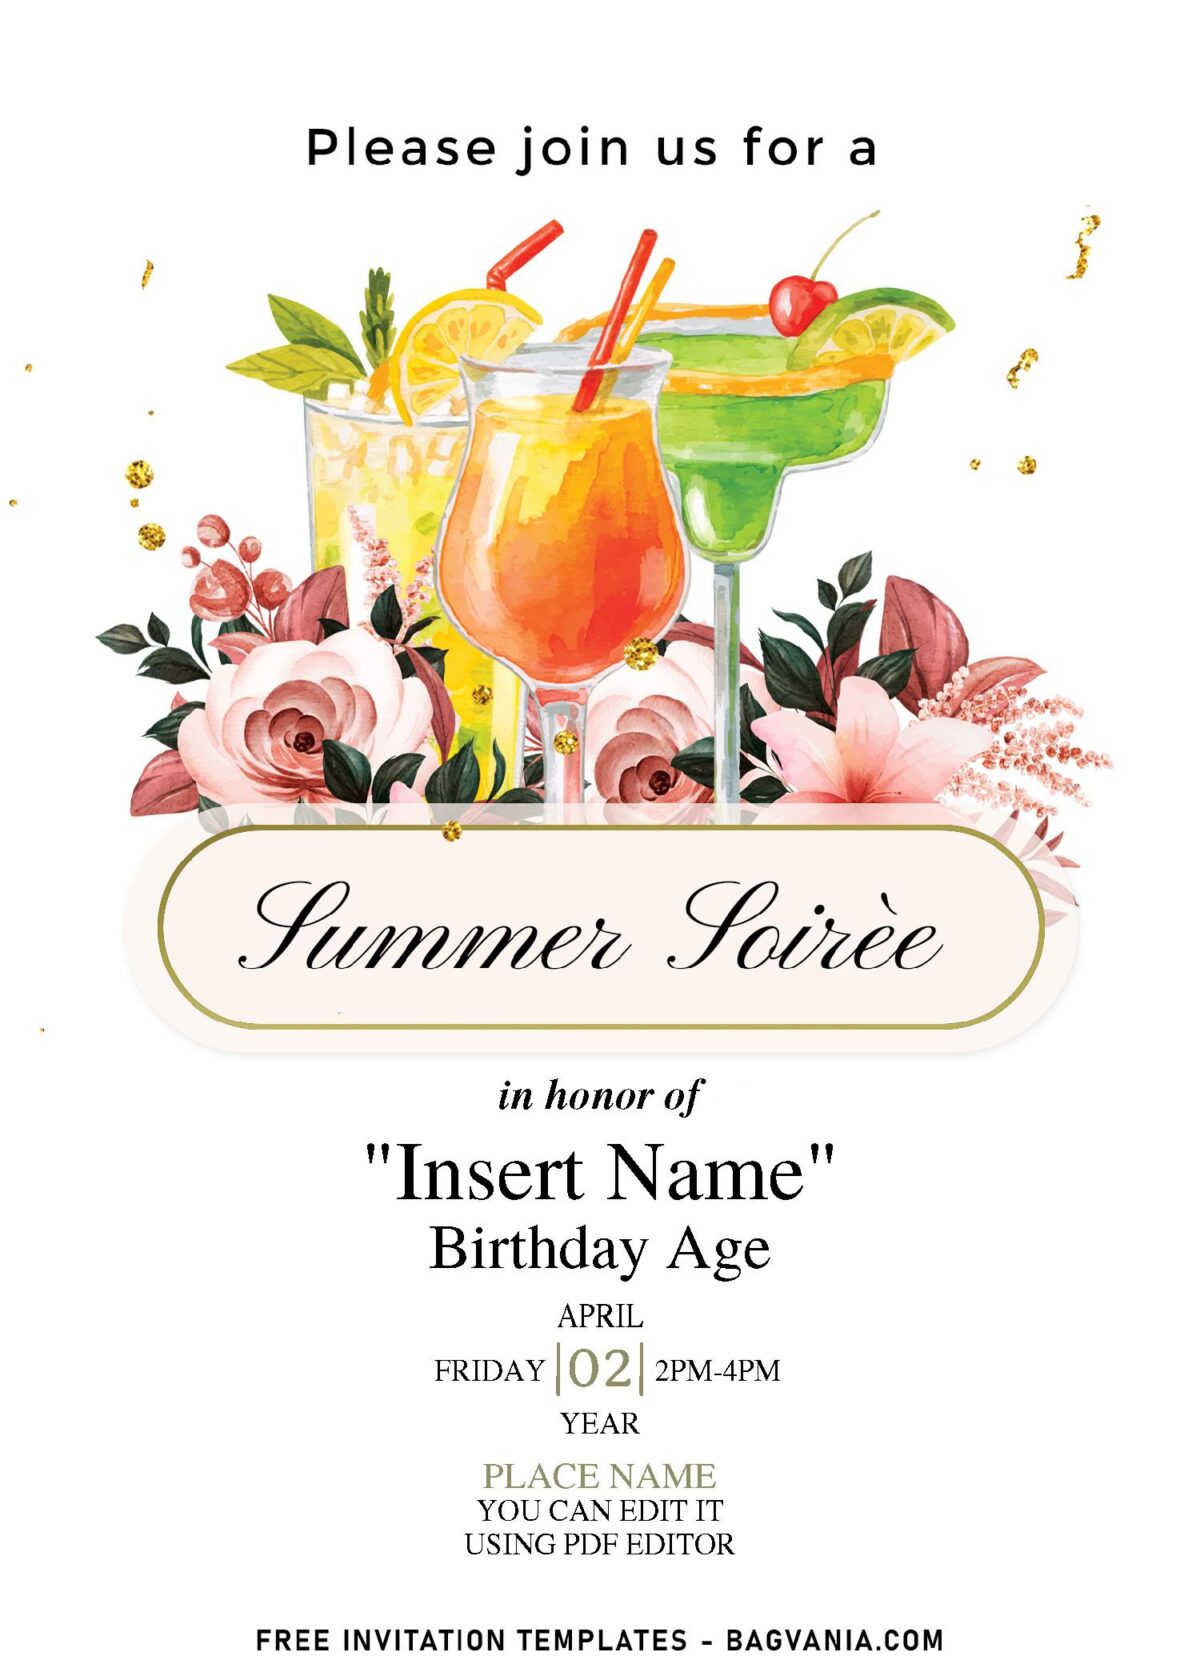 (Free Editable PDF) Fun Summer Soiree Invitation Templates That You Don't Want To Miss with watercolor floral decorations